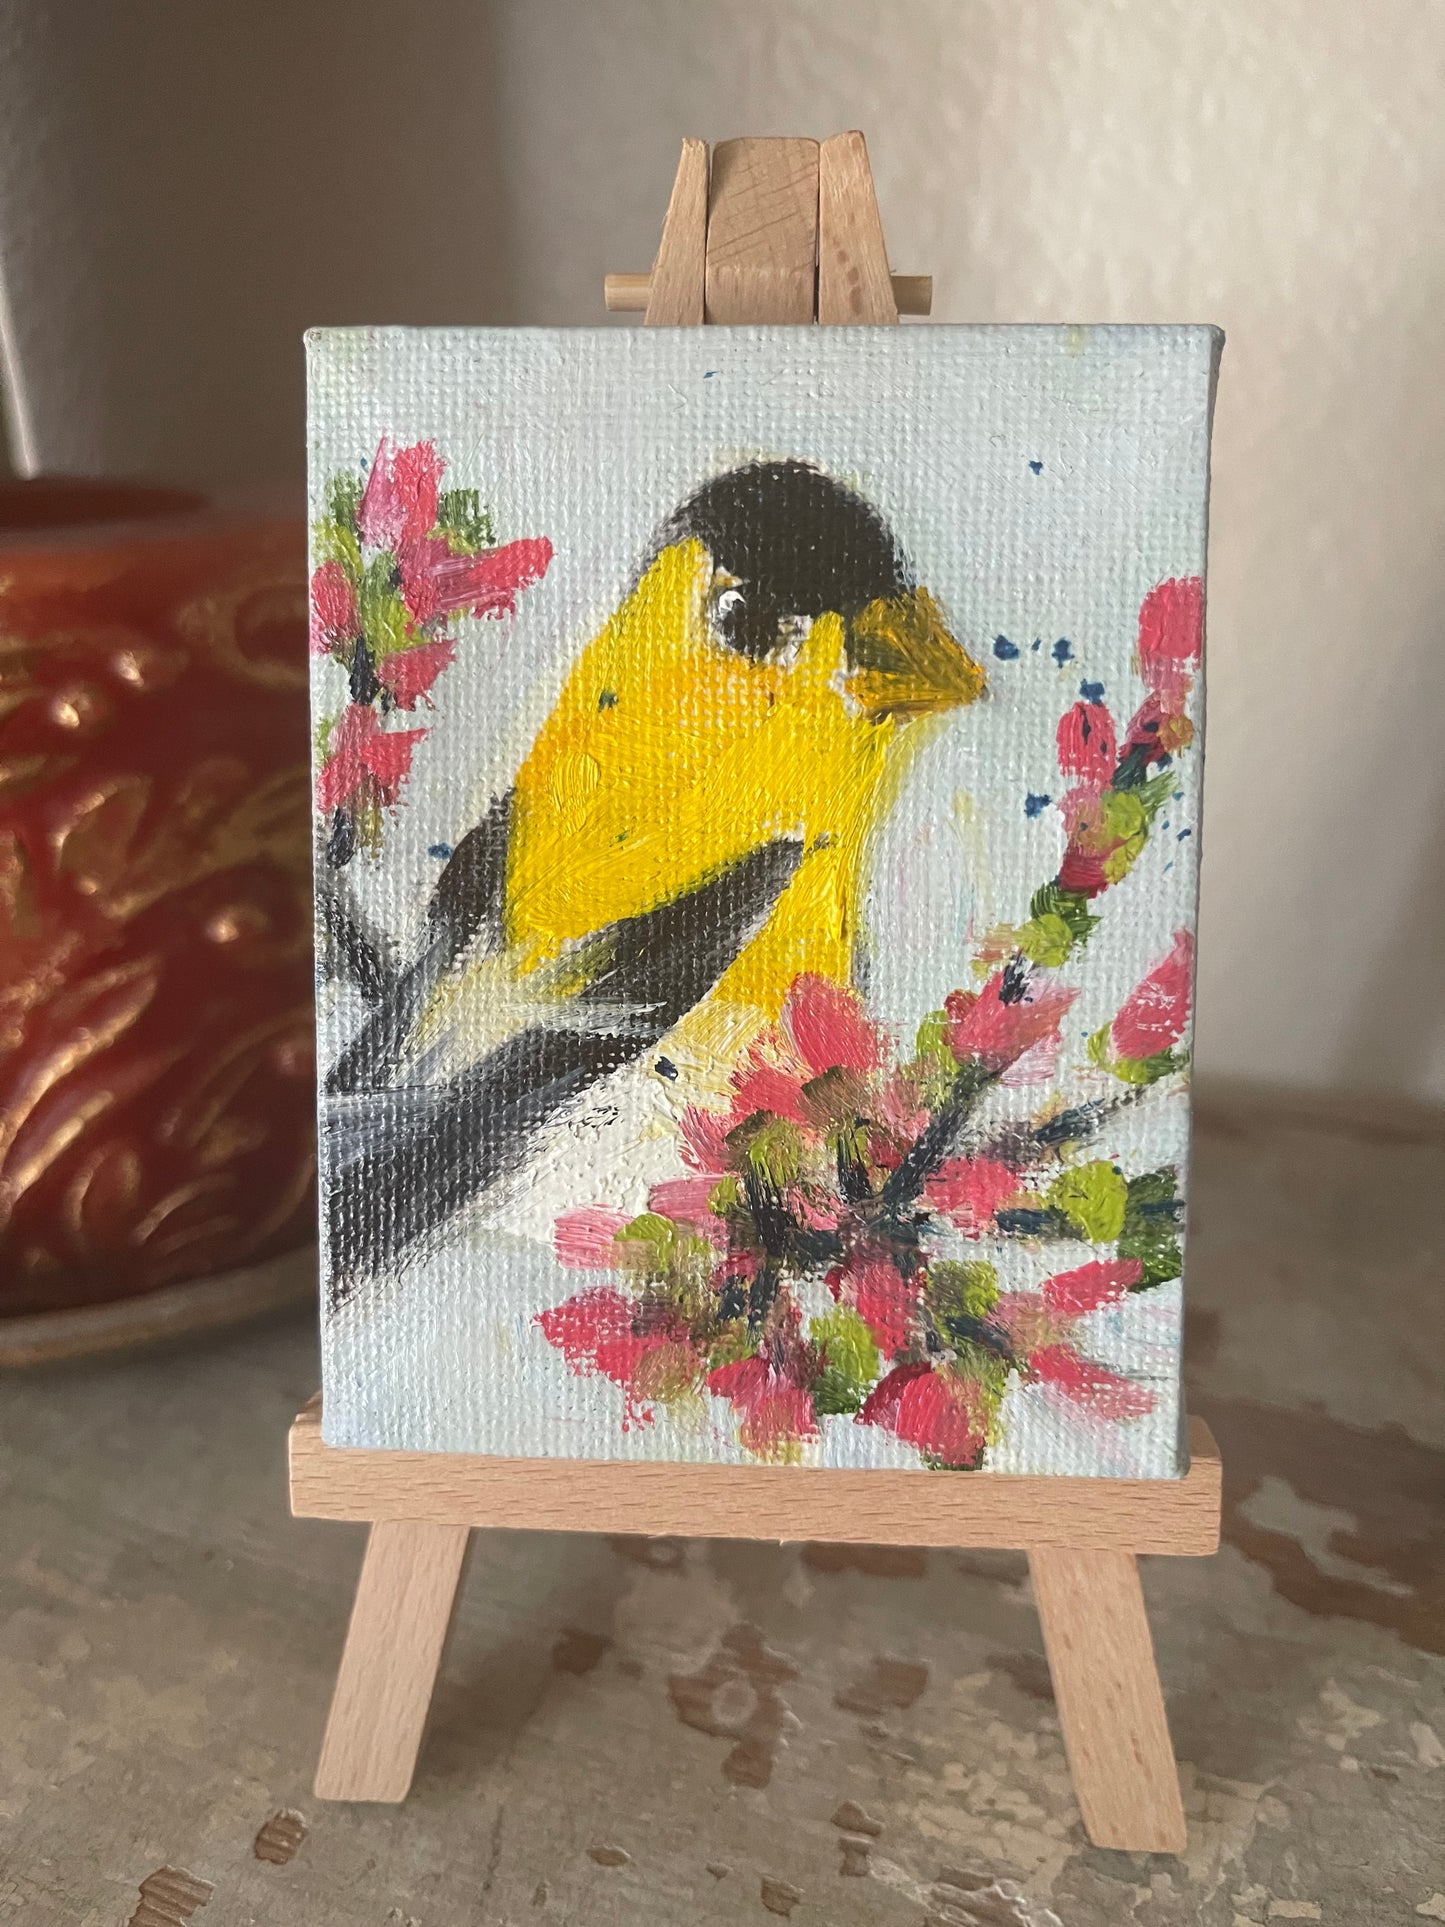 American Goldfinch-Original Miniature Oil Painting with Stand